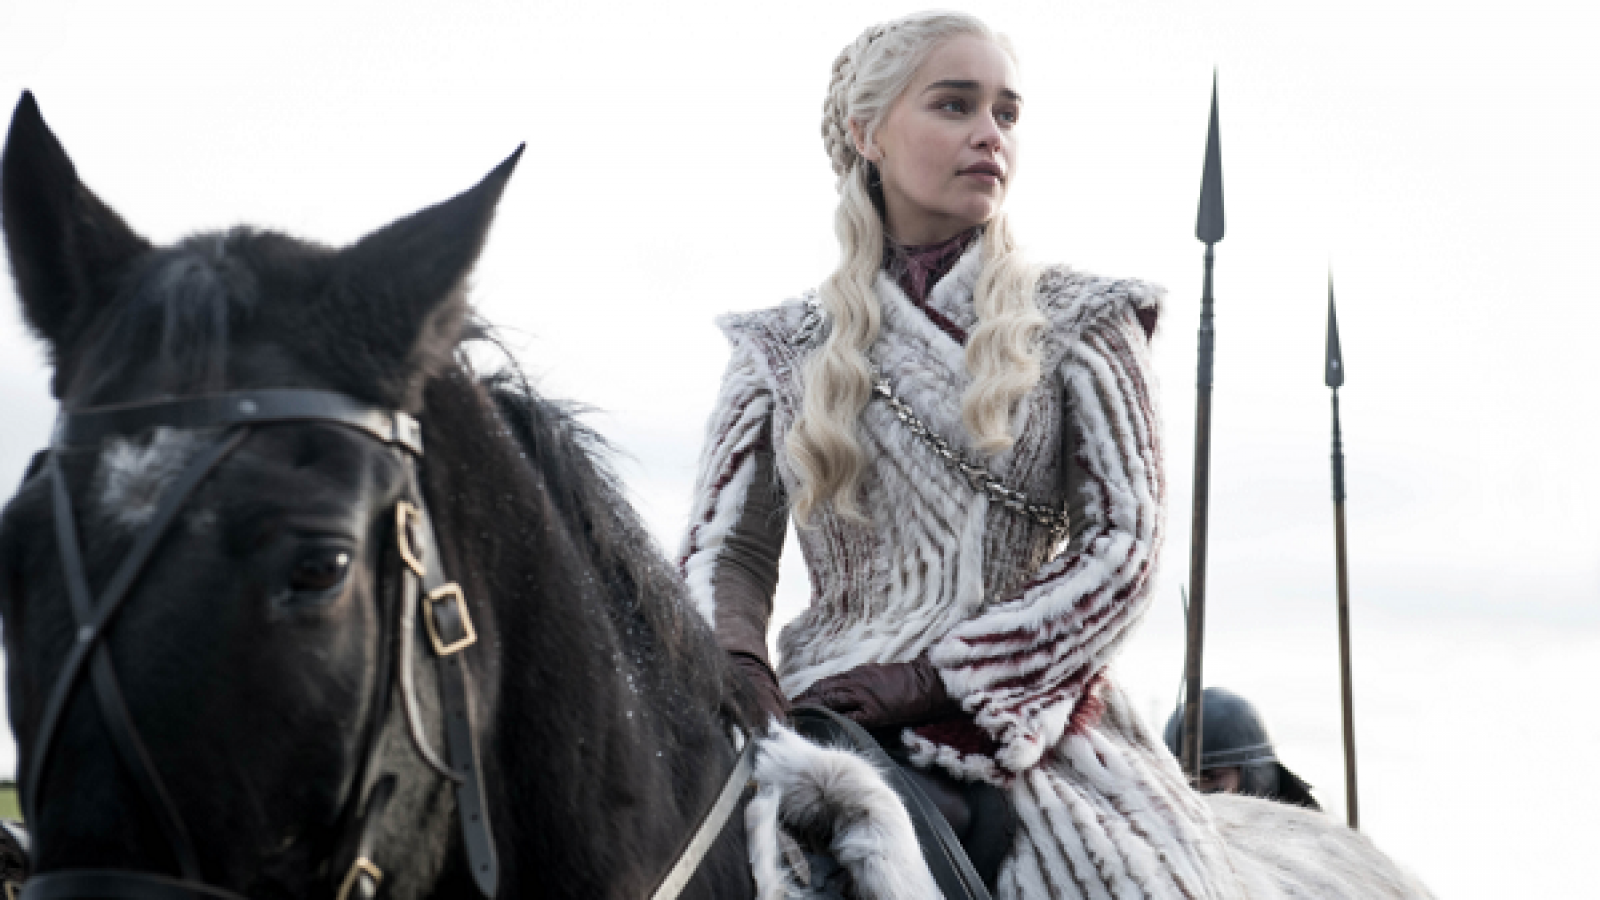 Watch 'Game of Thrones' Season 8 Premiere: Live Stream, and More Info